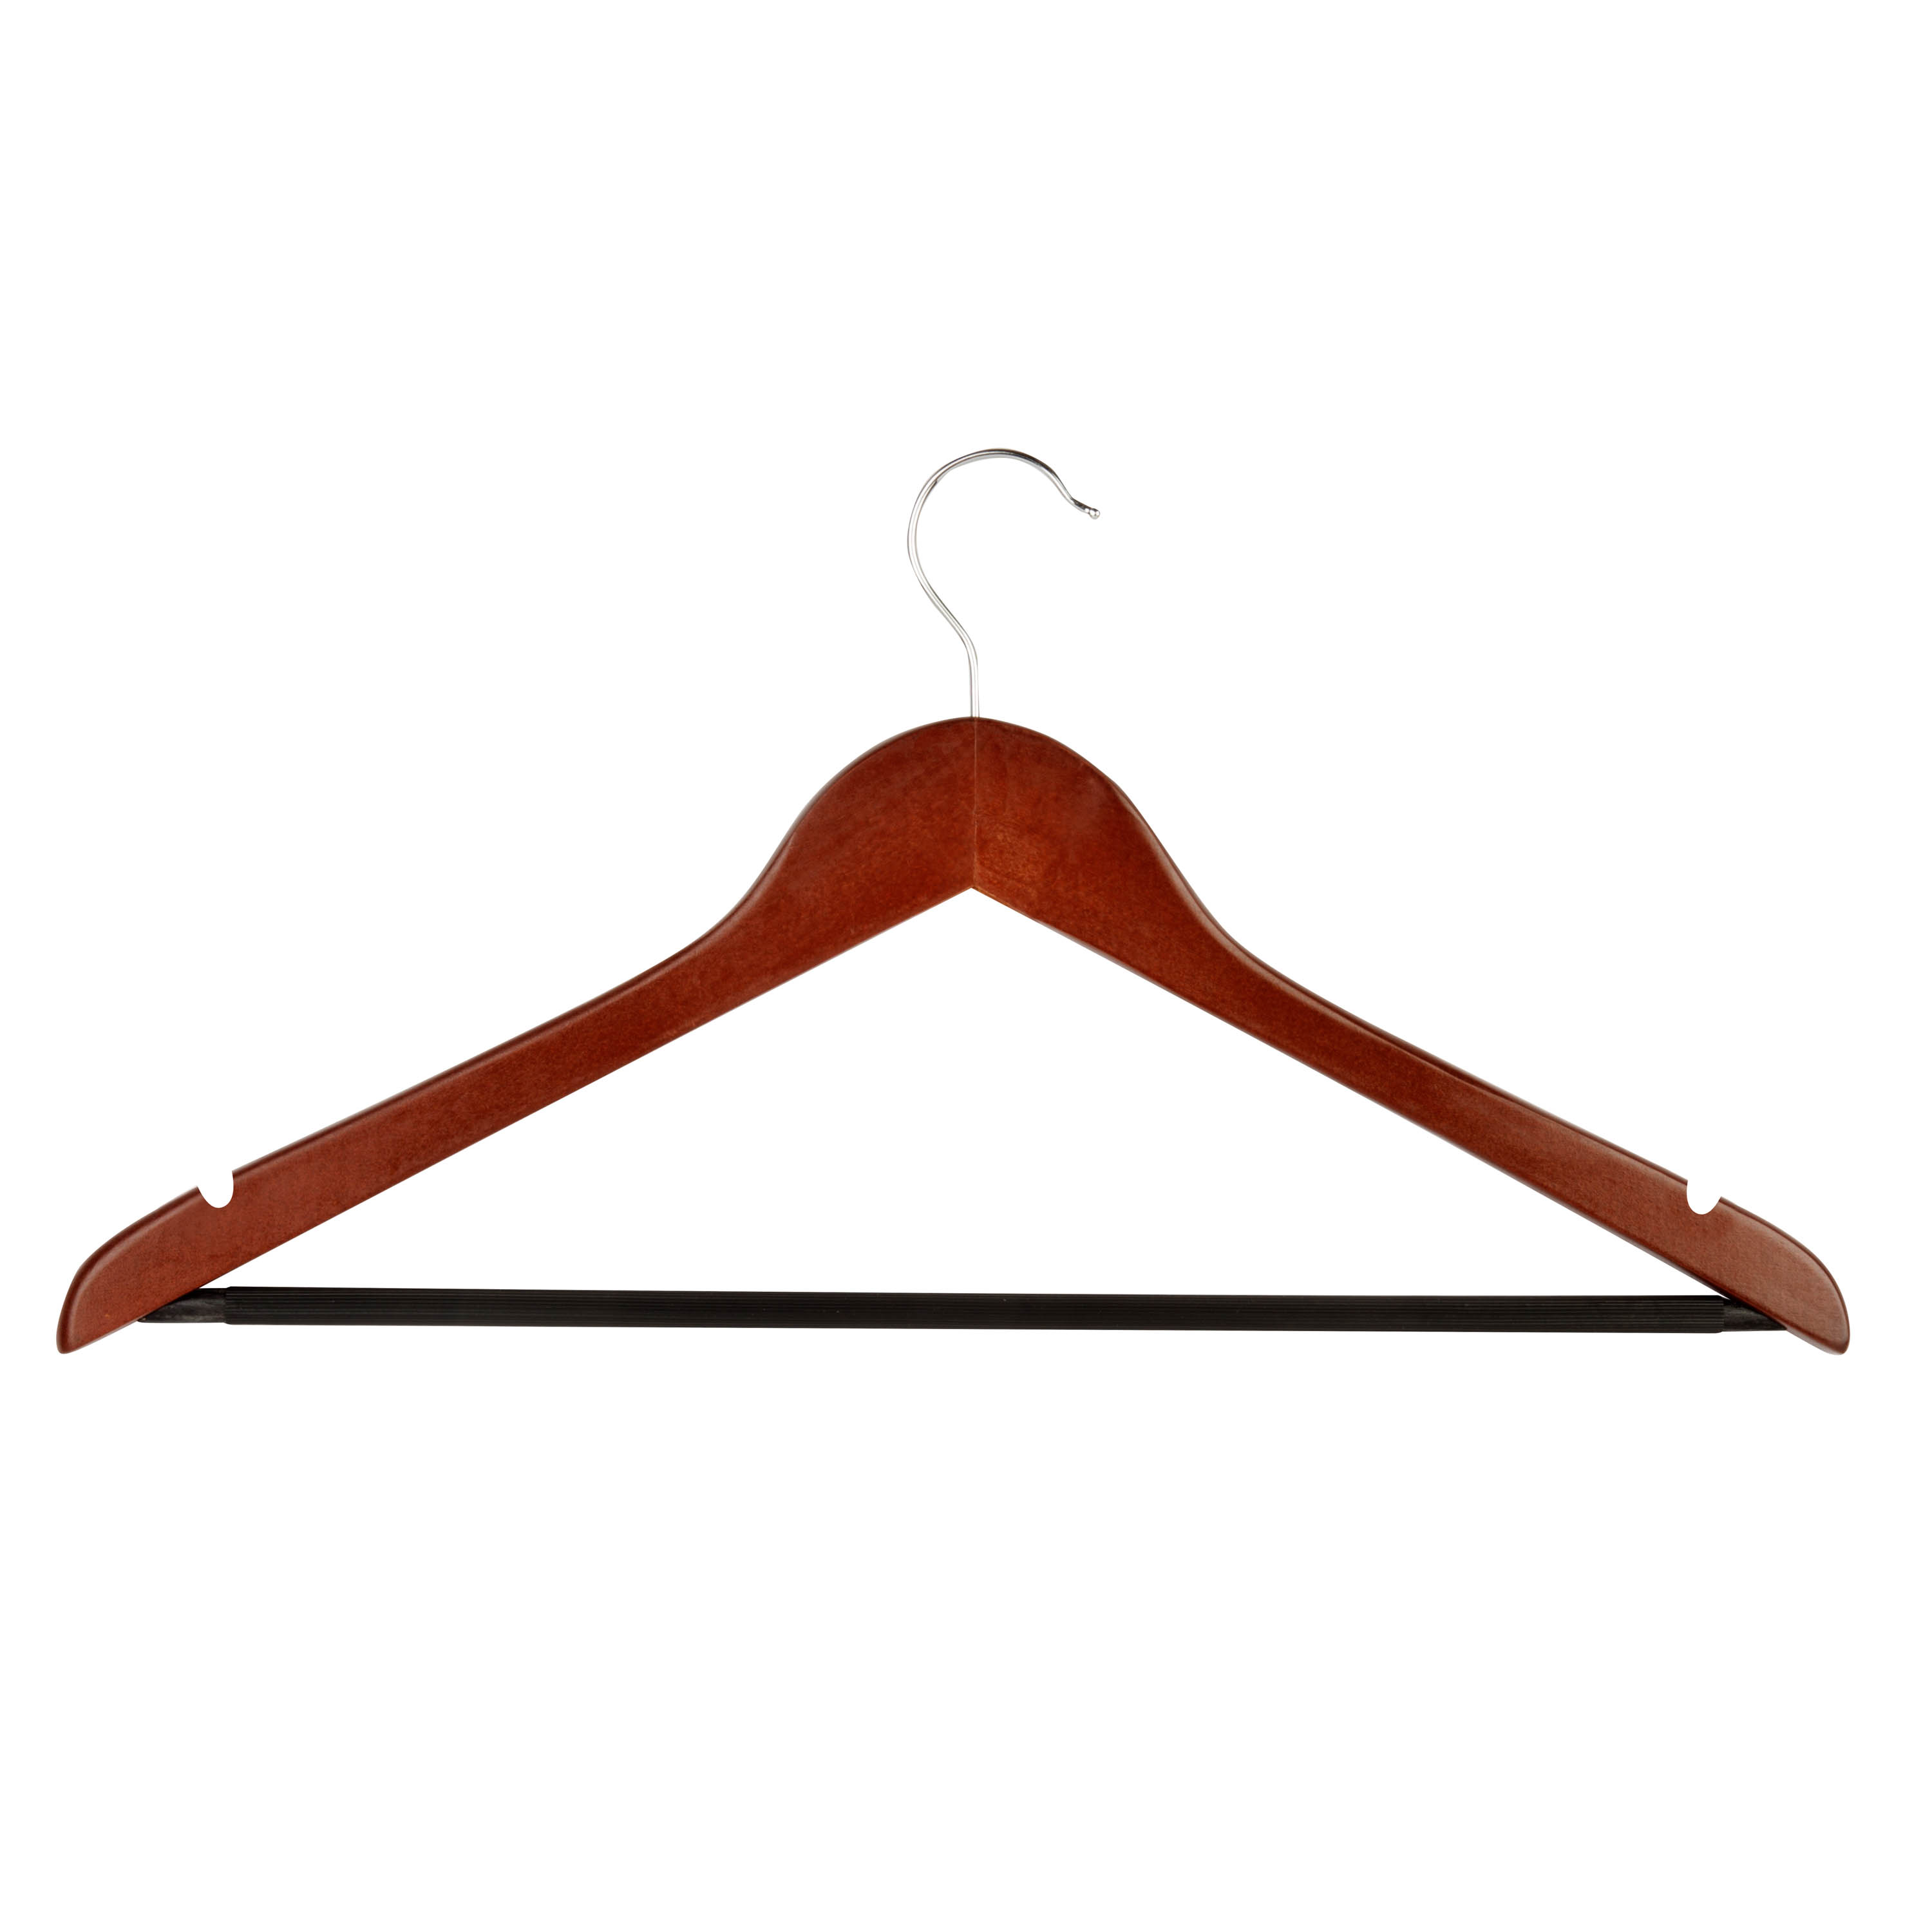 Honey-Can-Do Non-Slip Wood Suit Clothes Hangers with Swivel Hook, Cherry Finish, 24-Pack - image 2 of 5